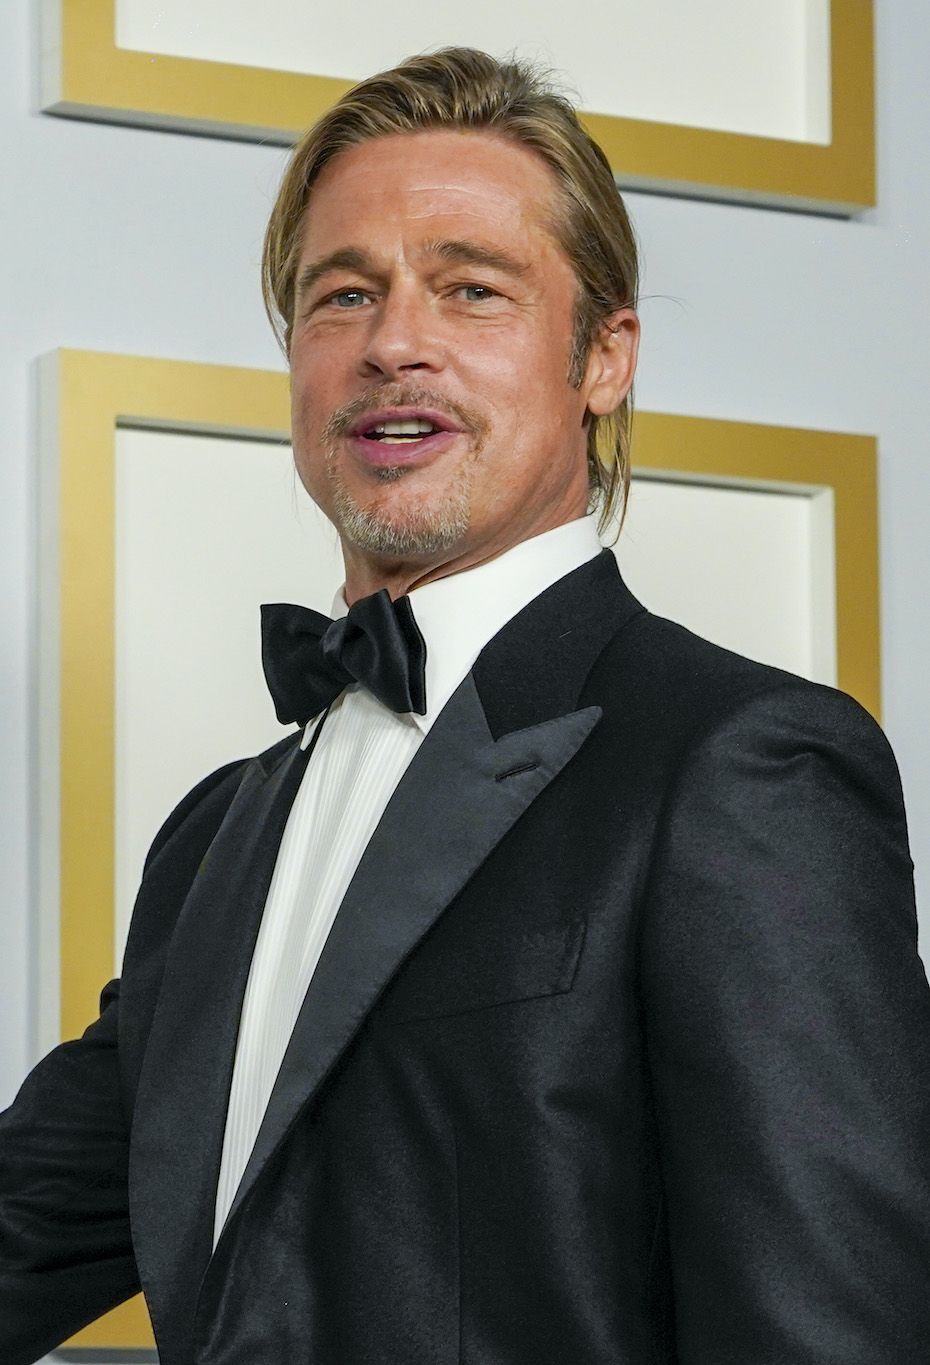 brad pitt opens up about suffering with "face blindness"